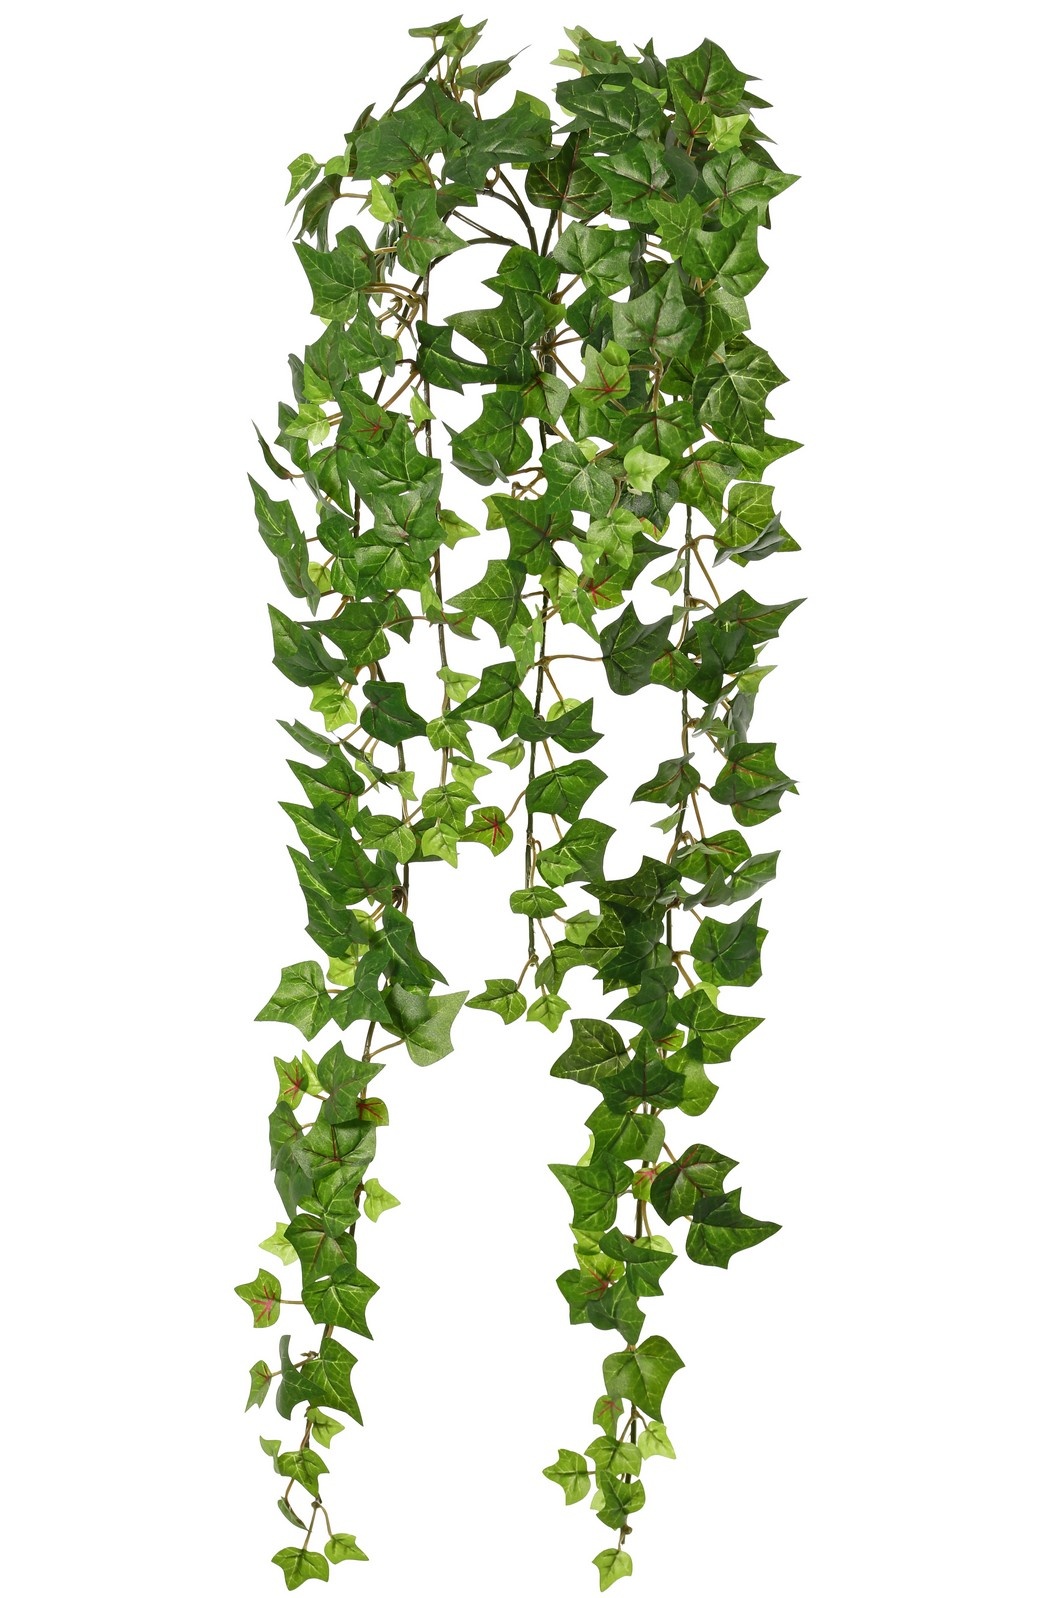 Hedera plant (Ivy) 'prime' with 5 offshoots & 317 polyester leaves, L 60 cm, Ø 25 cm